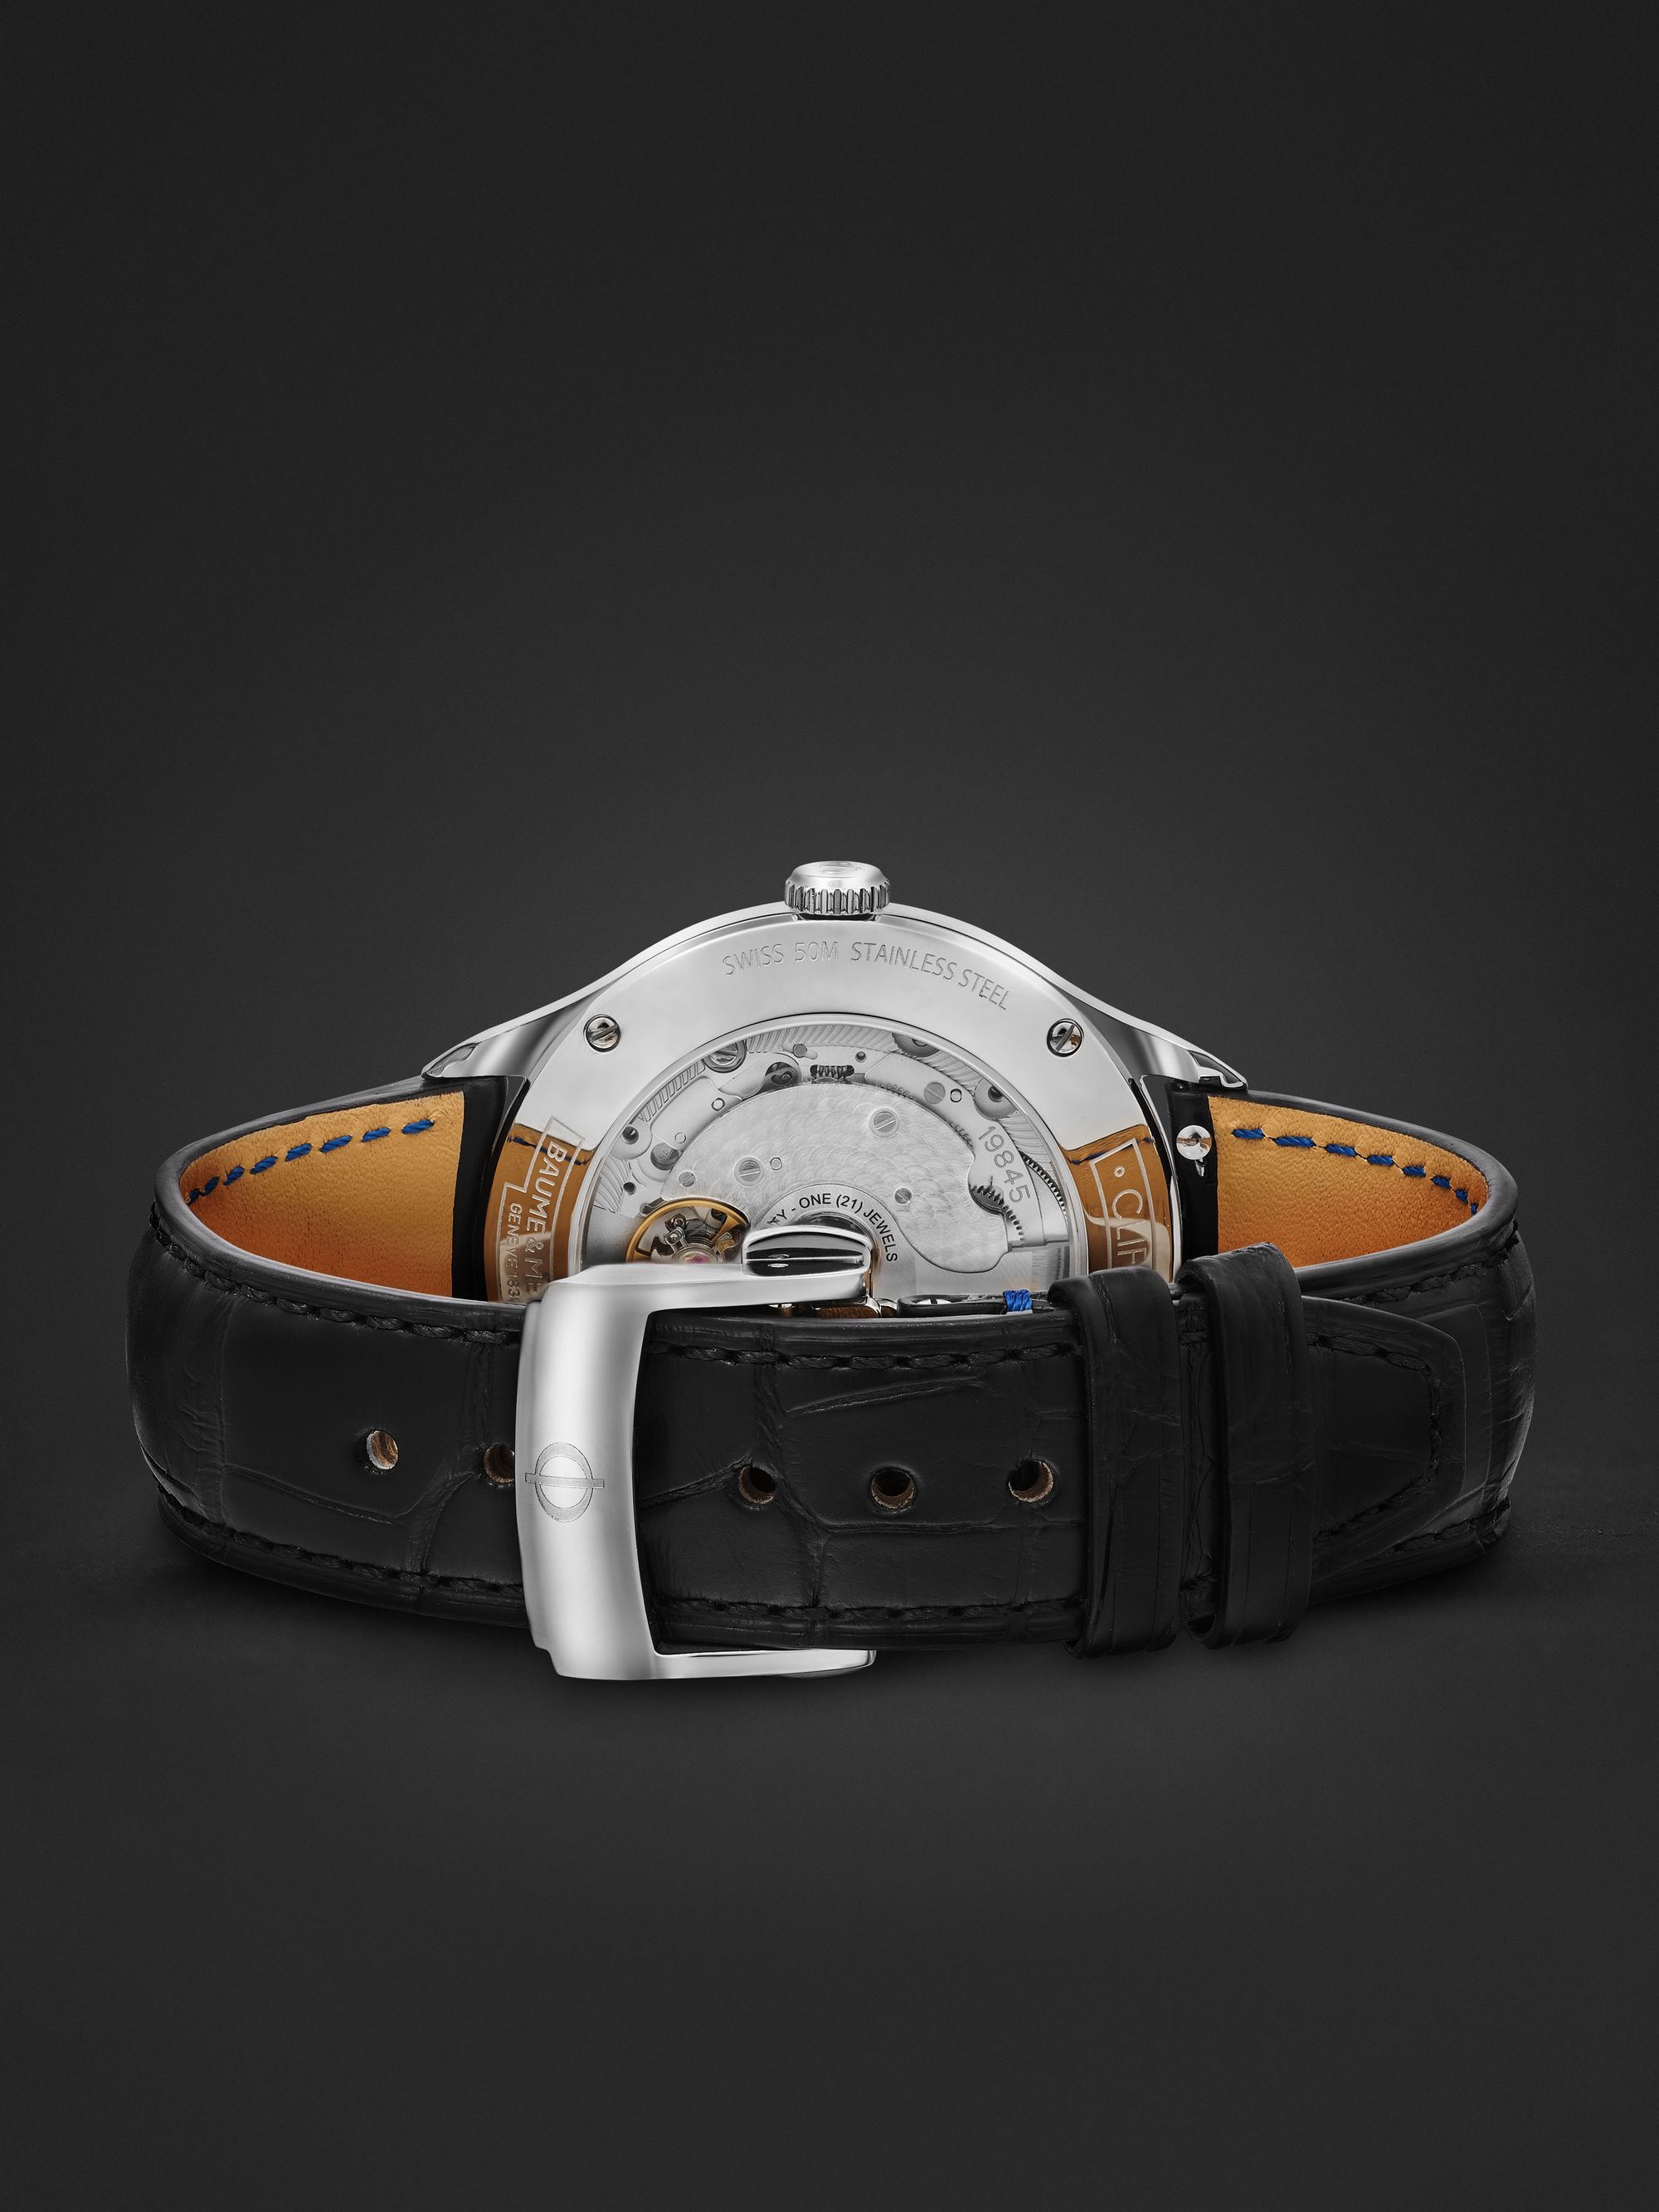 BAUME & MERCIER Clifton Baumatic Automatic Chronometer 40mm Steel and Alligator Watch, Ref. No. M0A10692